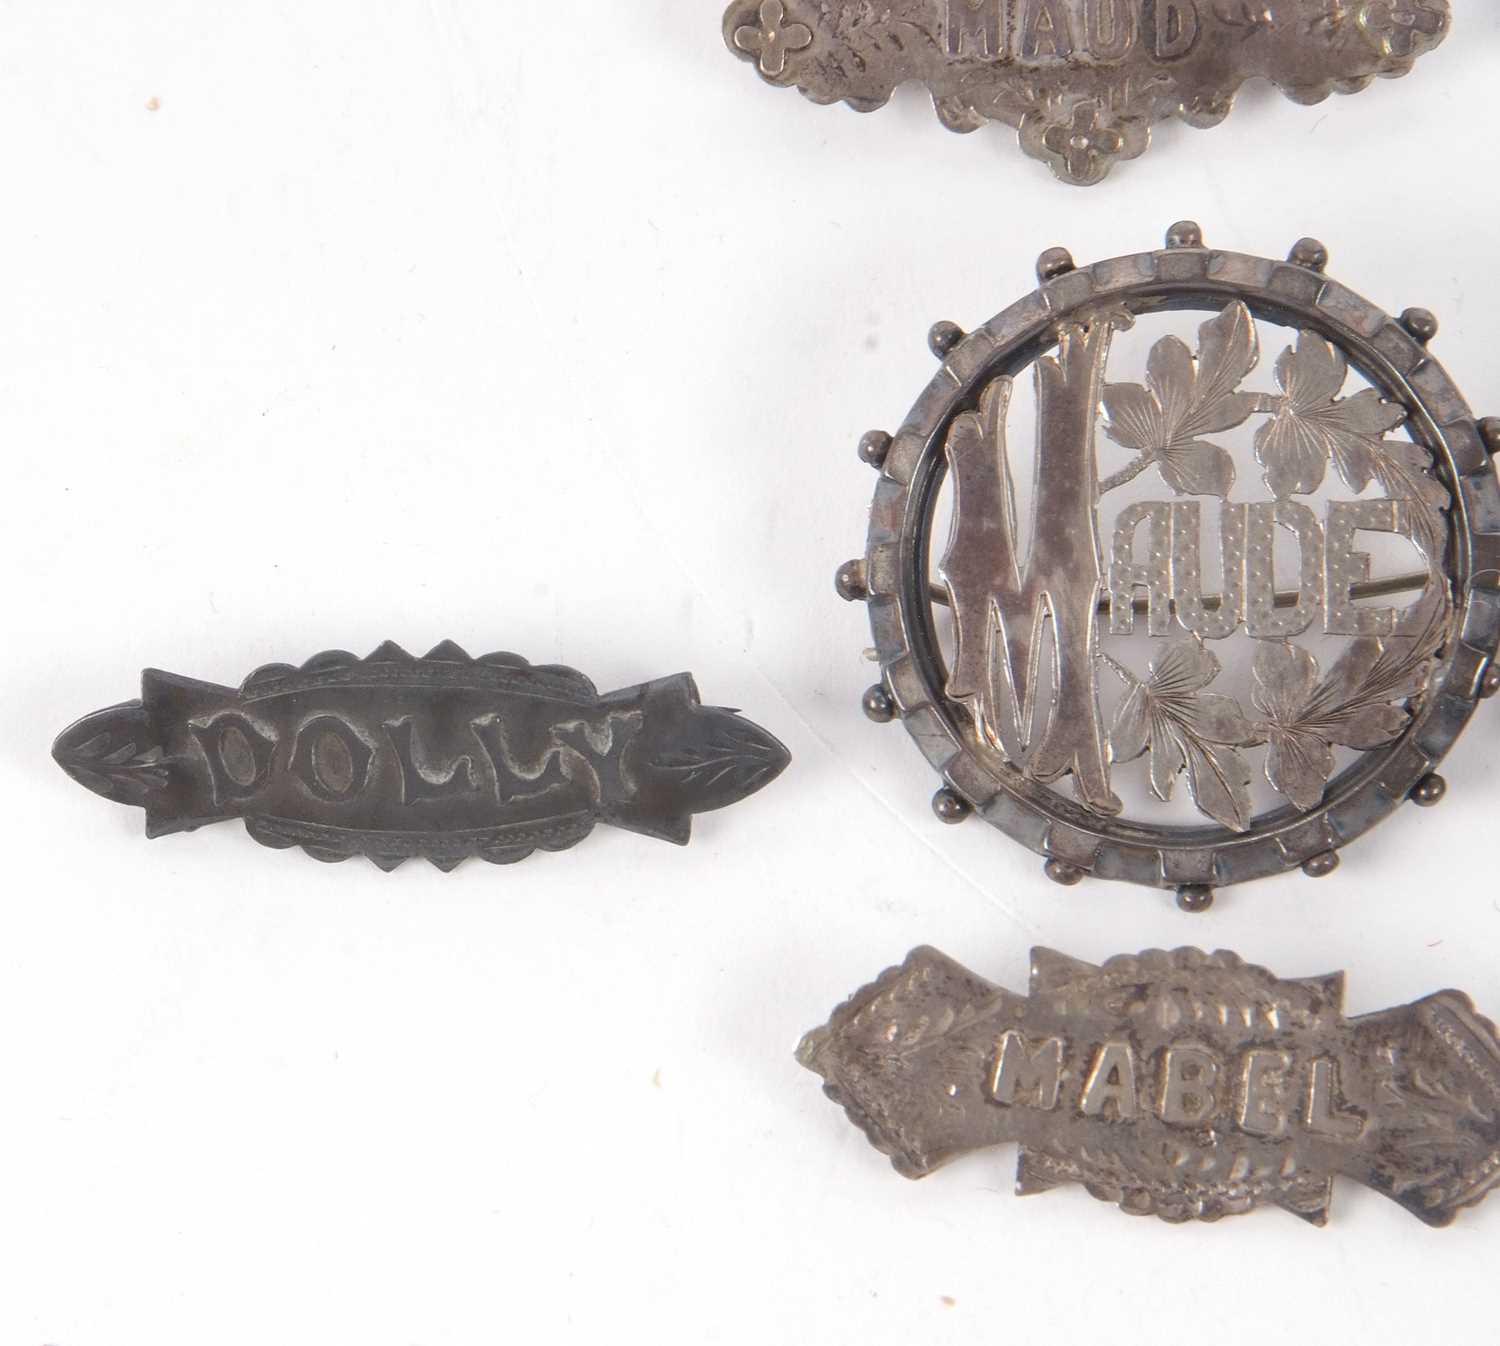 Eight early 20th century silver and white metal name brooches, to include Jeanie, Maude, Louie, - Image 5 of 6